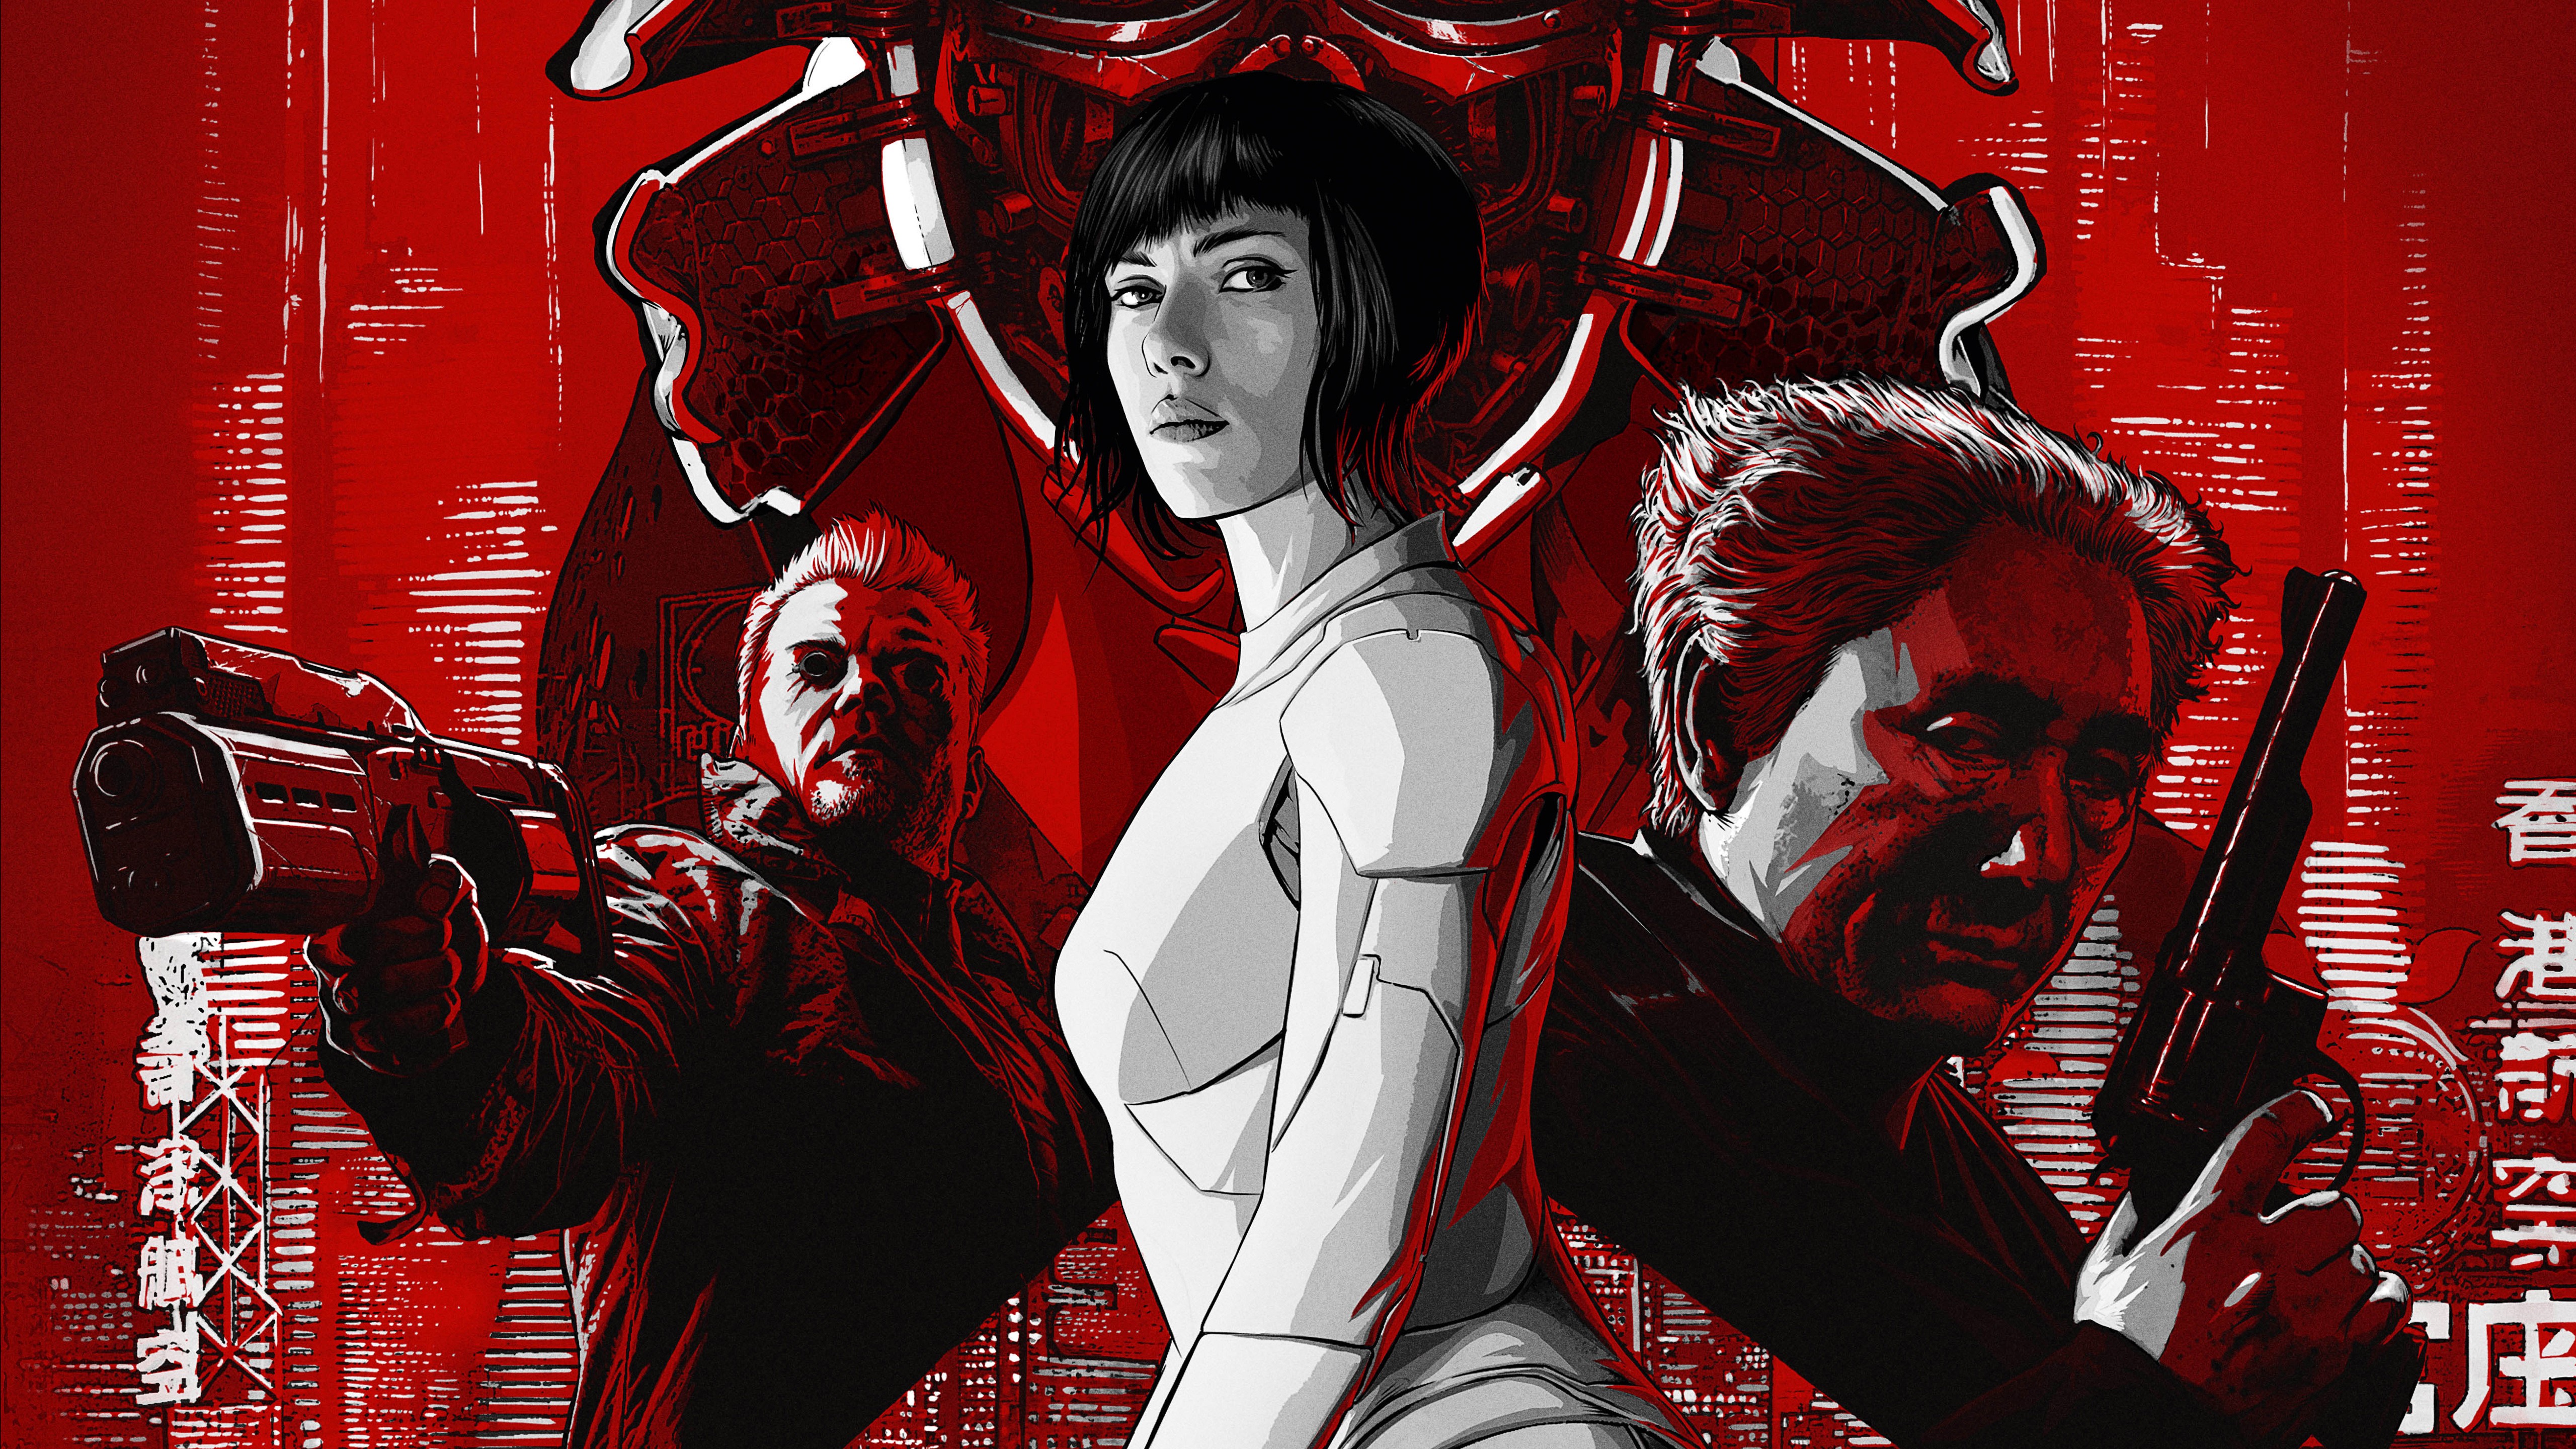 ghost in the shell wallpaper hd,red,art,illustration,graphic design,poster